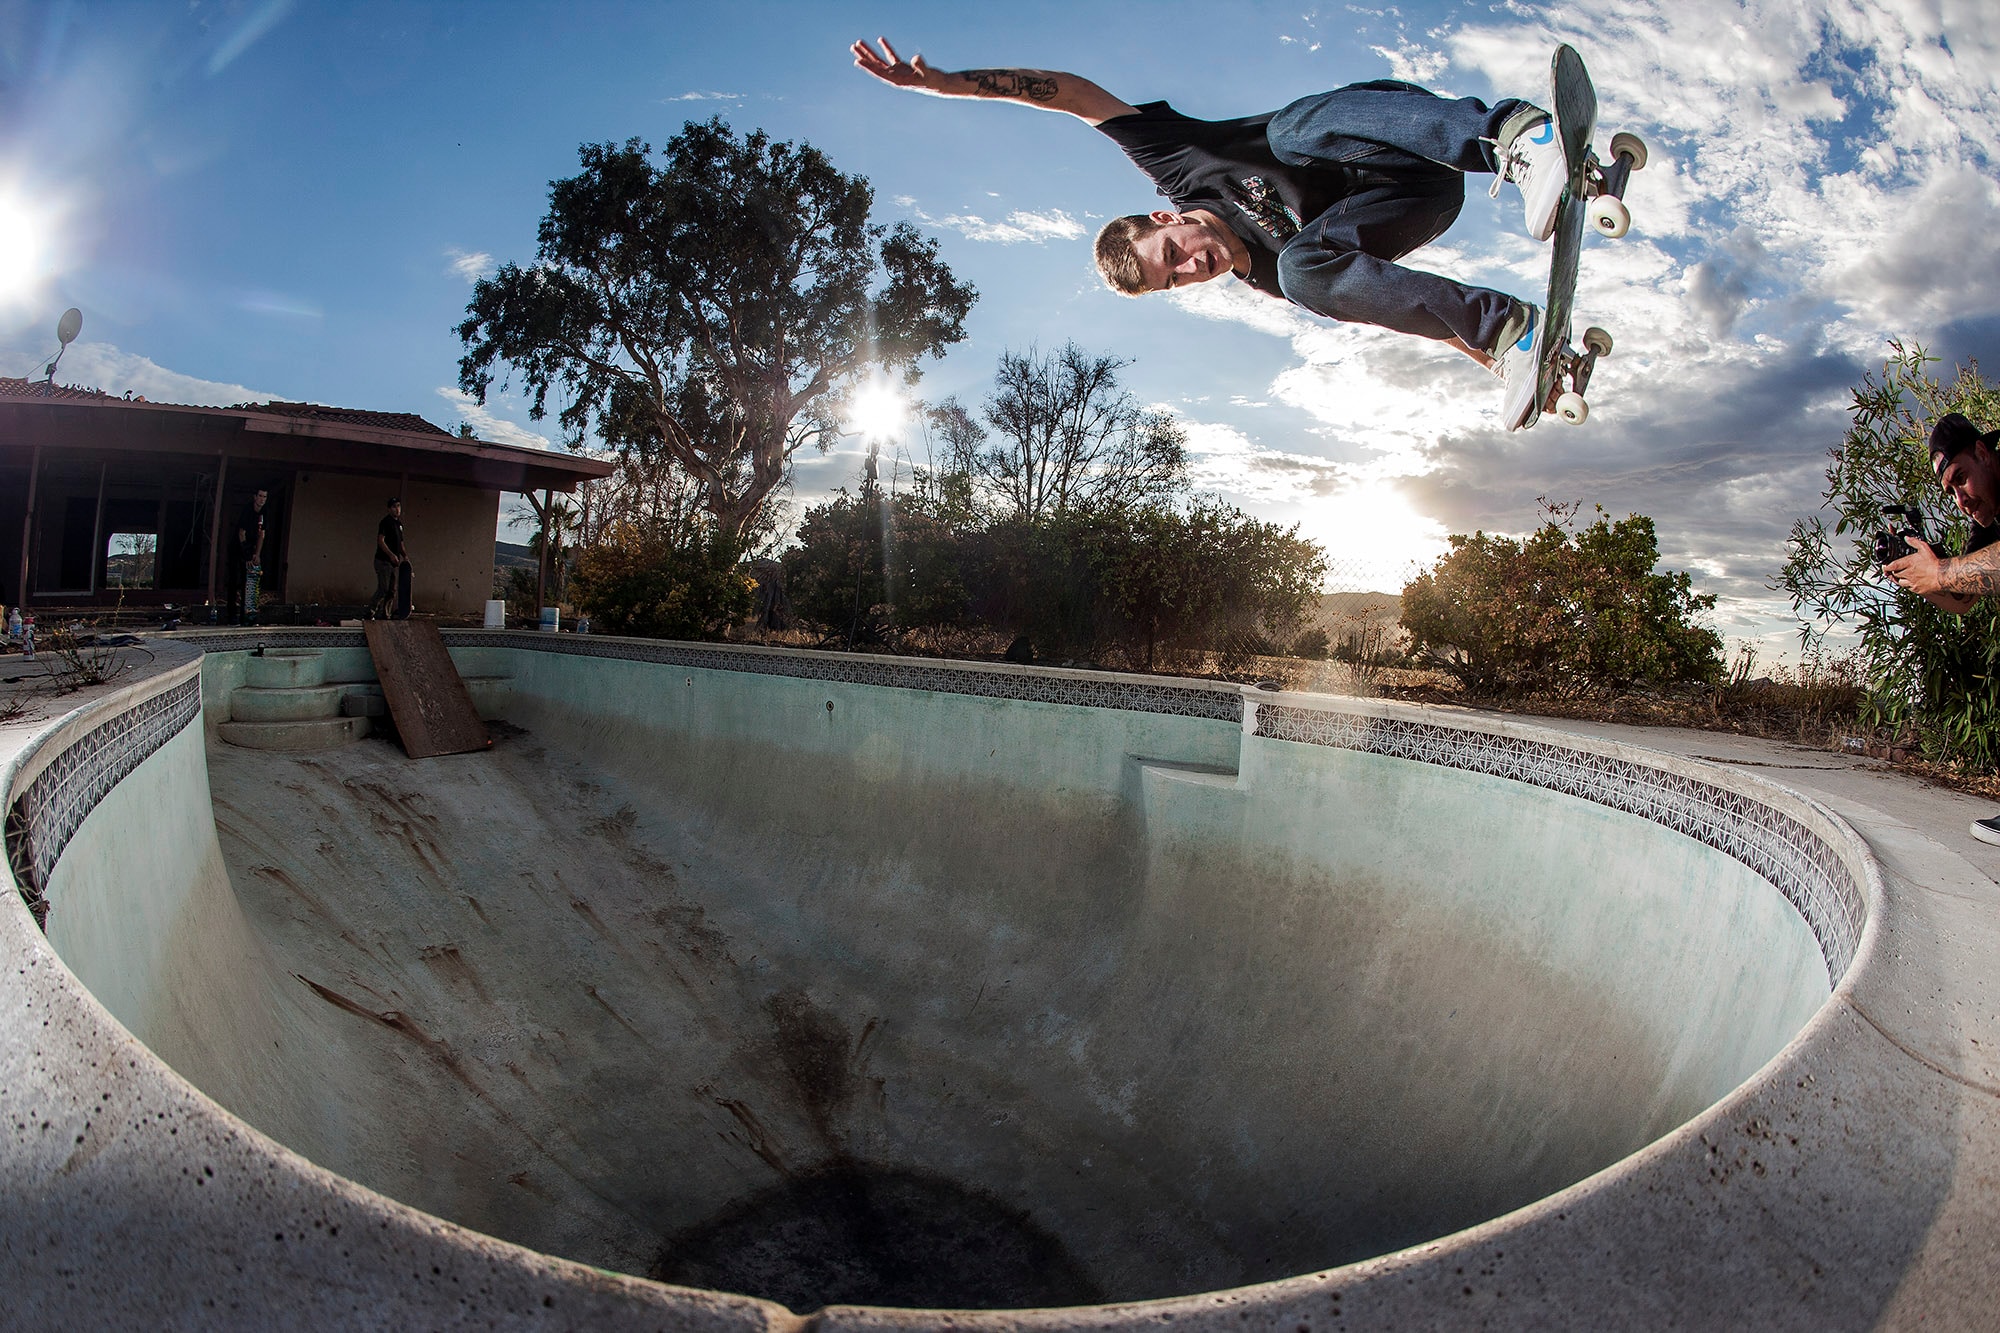 CLAY KREINER NOW PRO FOR MADNESS SKATEBOARDS